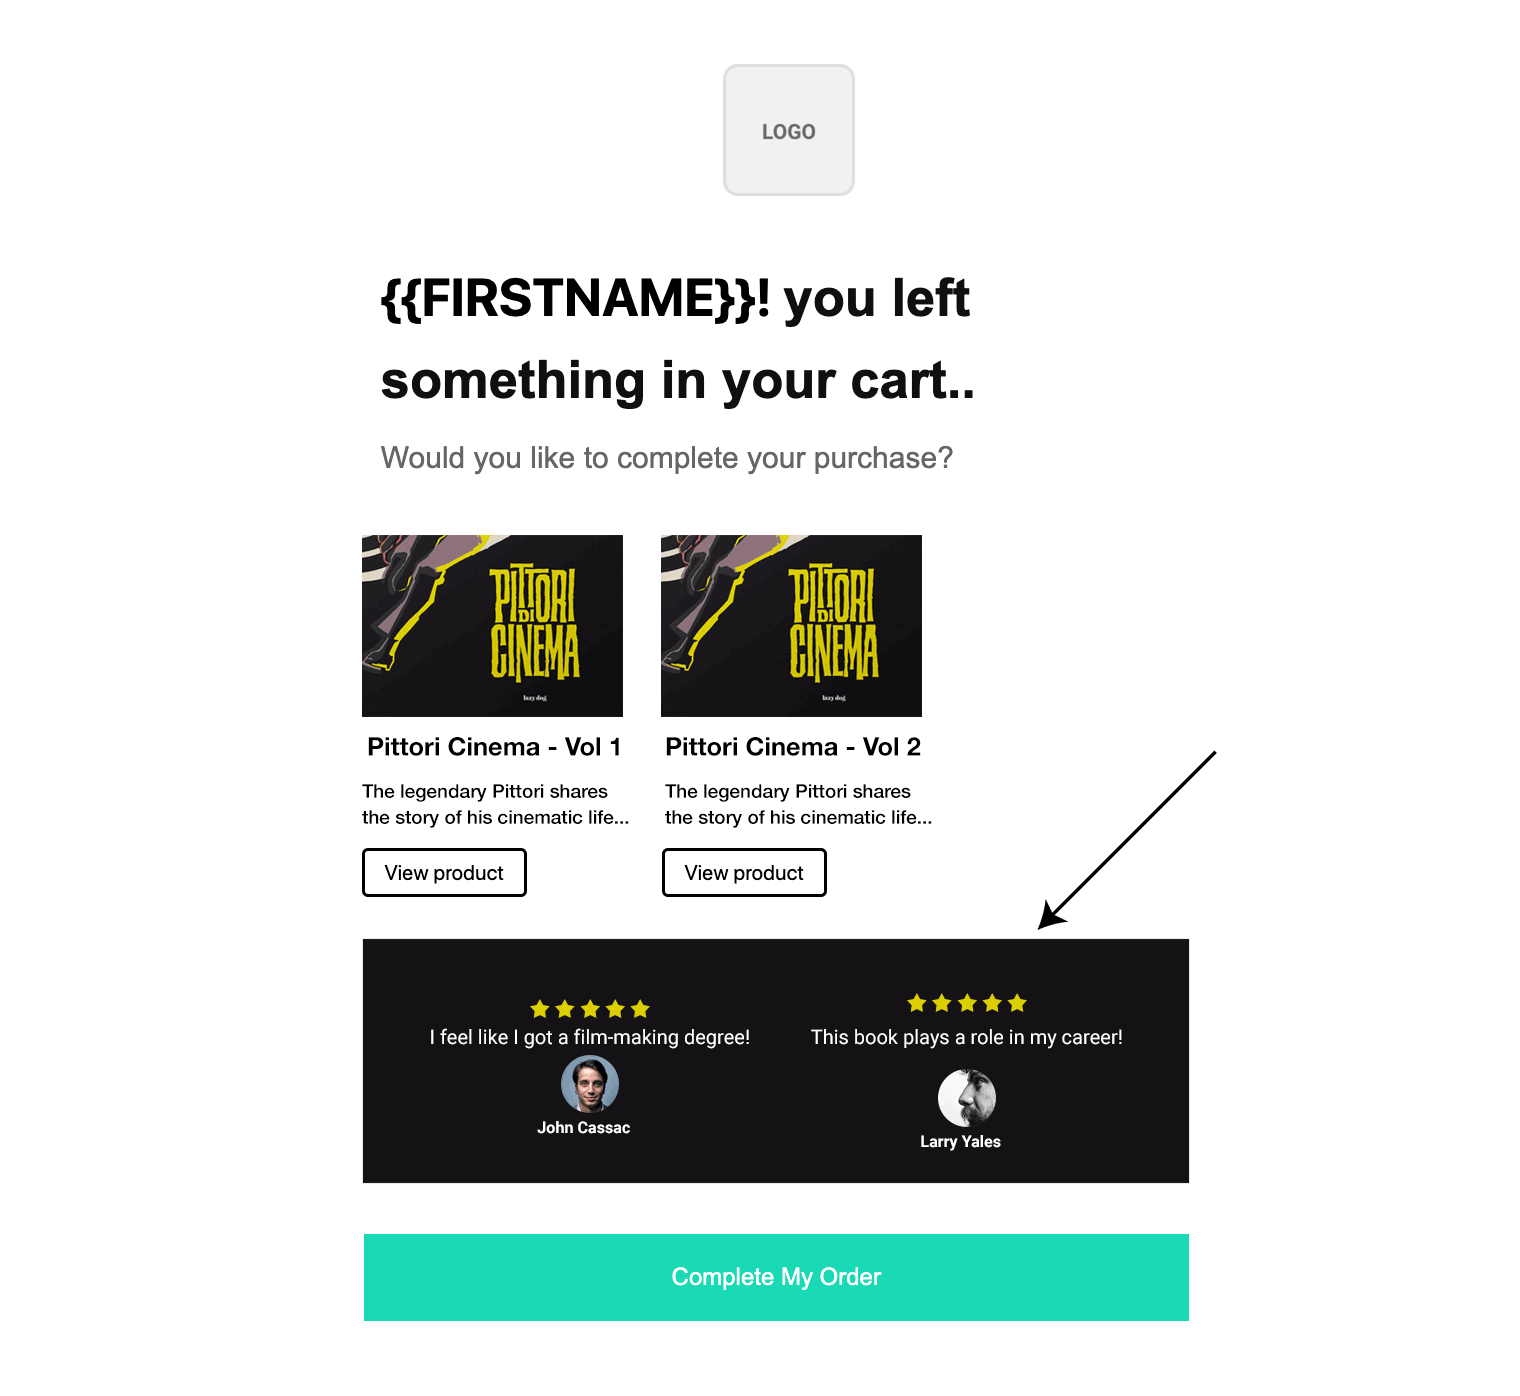 abandoned cart email templates - social proofs